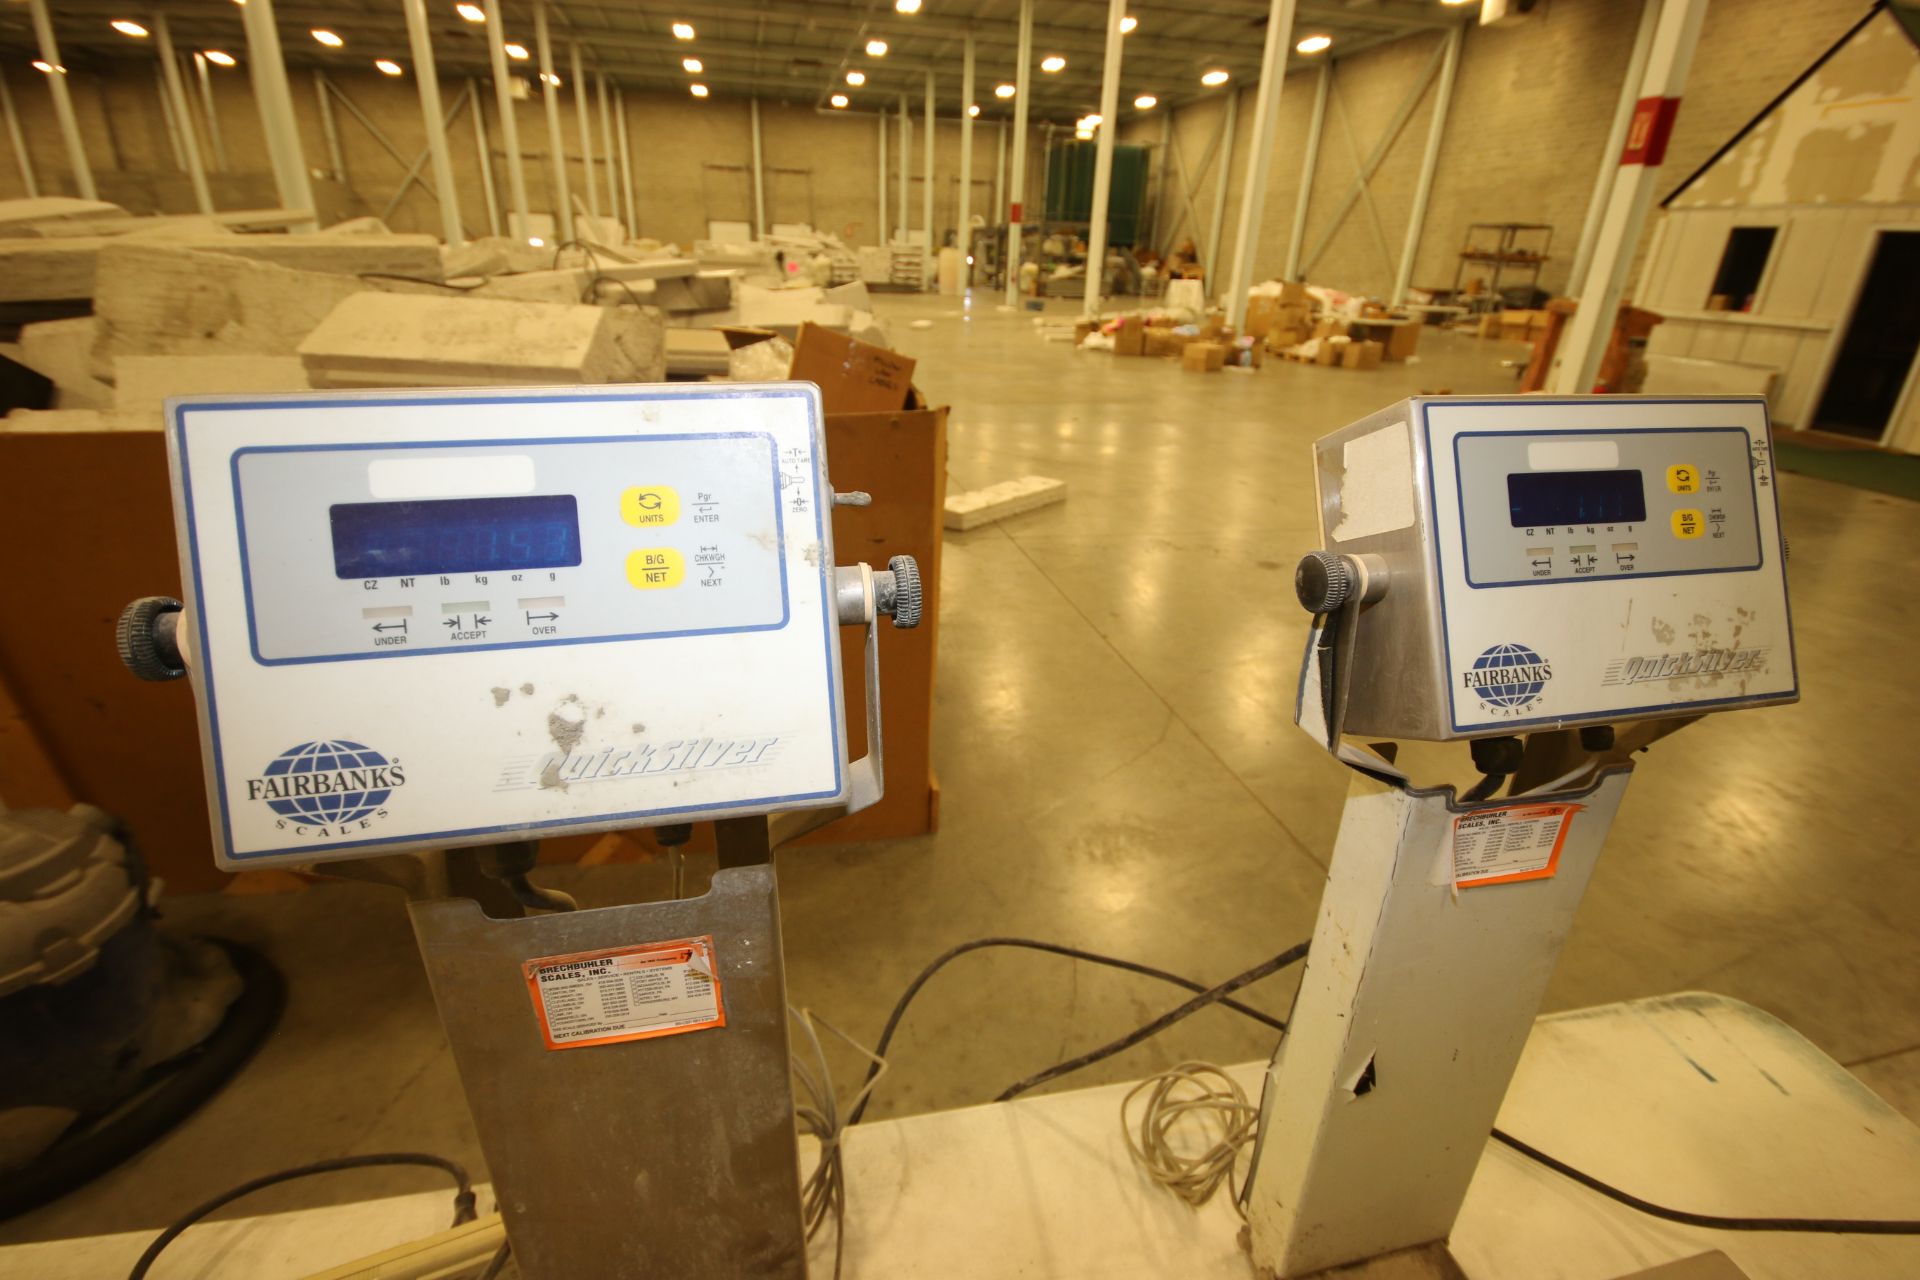 Fairbanks Digital Platform Scales, M/N IND-HR5000-1A, 2-with 18" L x 18" W S/S Platforms, and 1-with - Image 3 of 5